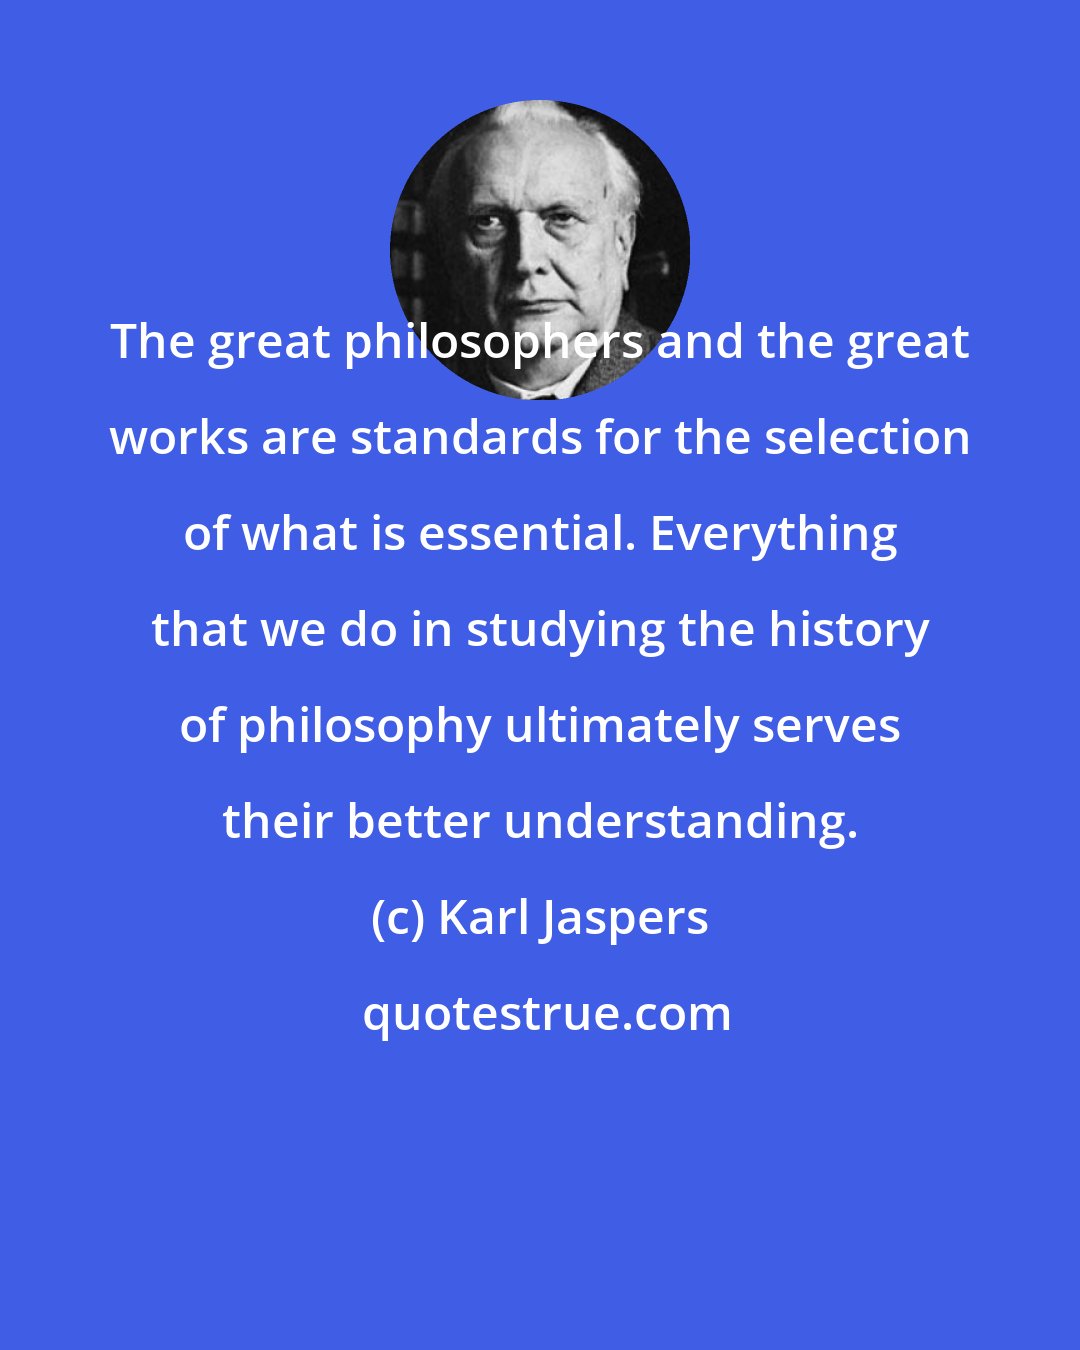 Karl Jaspers: The great philosophers and the great works are standards for the selection of what is essential. Everything that we do in studying the history of philosophy ultimately serves their better understanding.